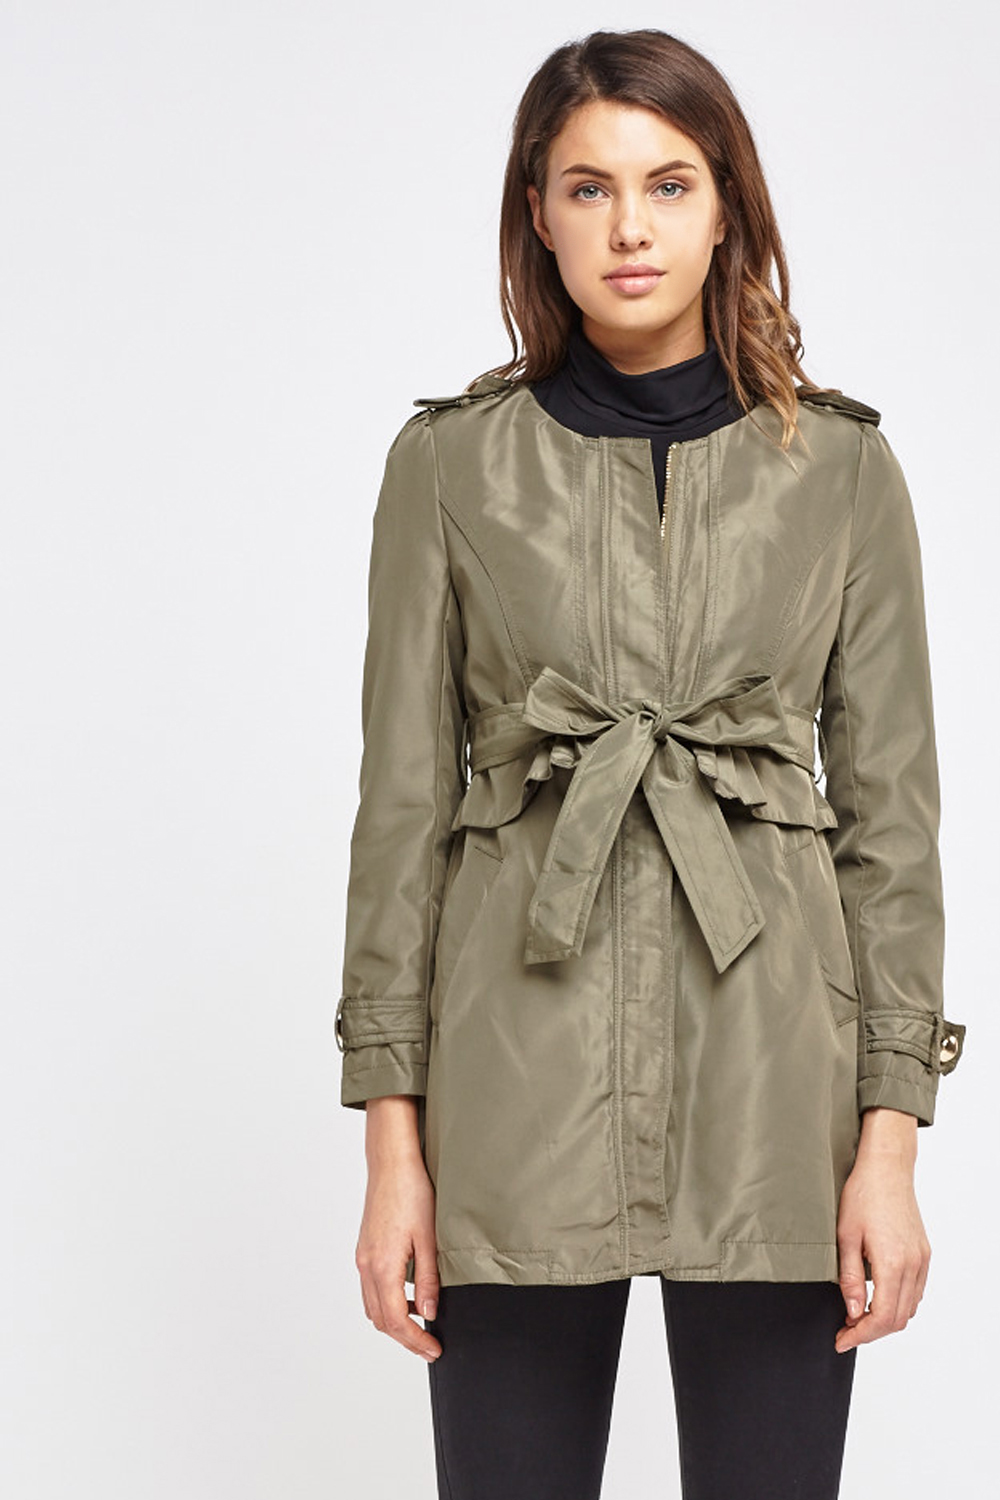 Frilly Peplum Trench Coat - Just $7